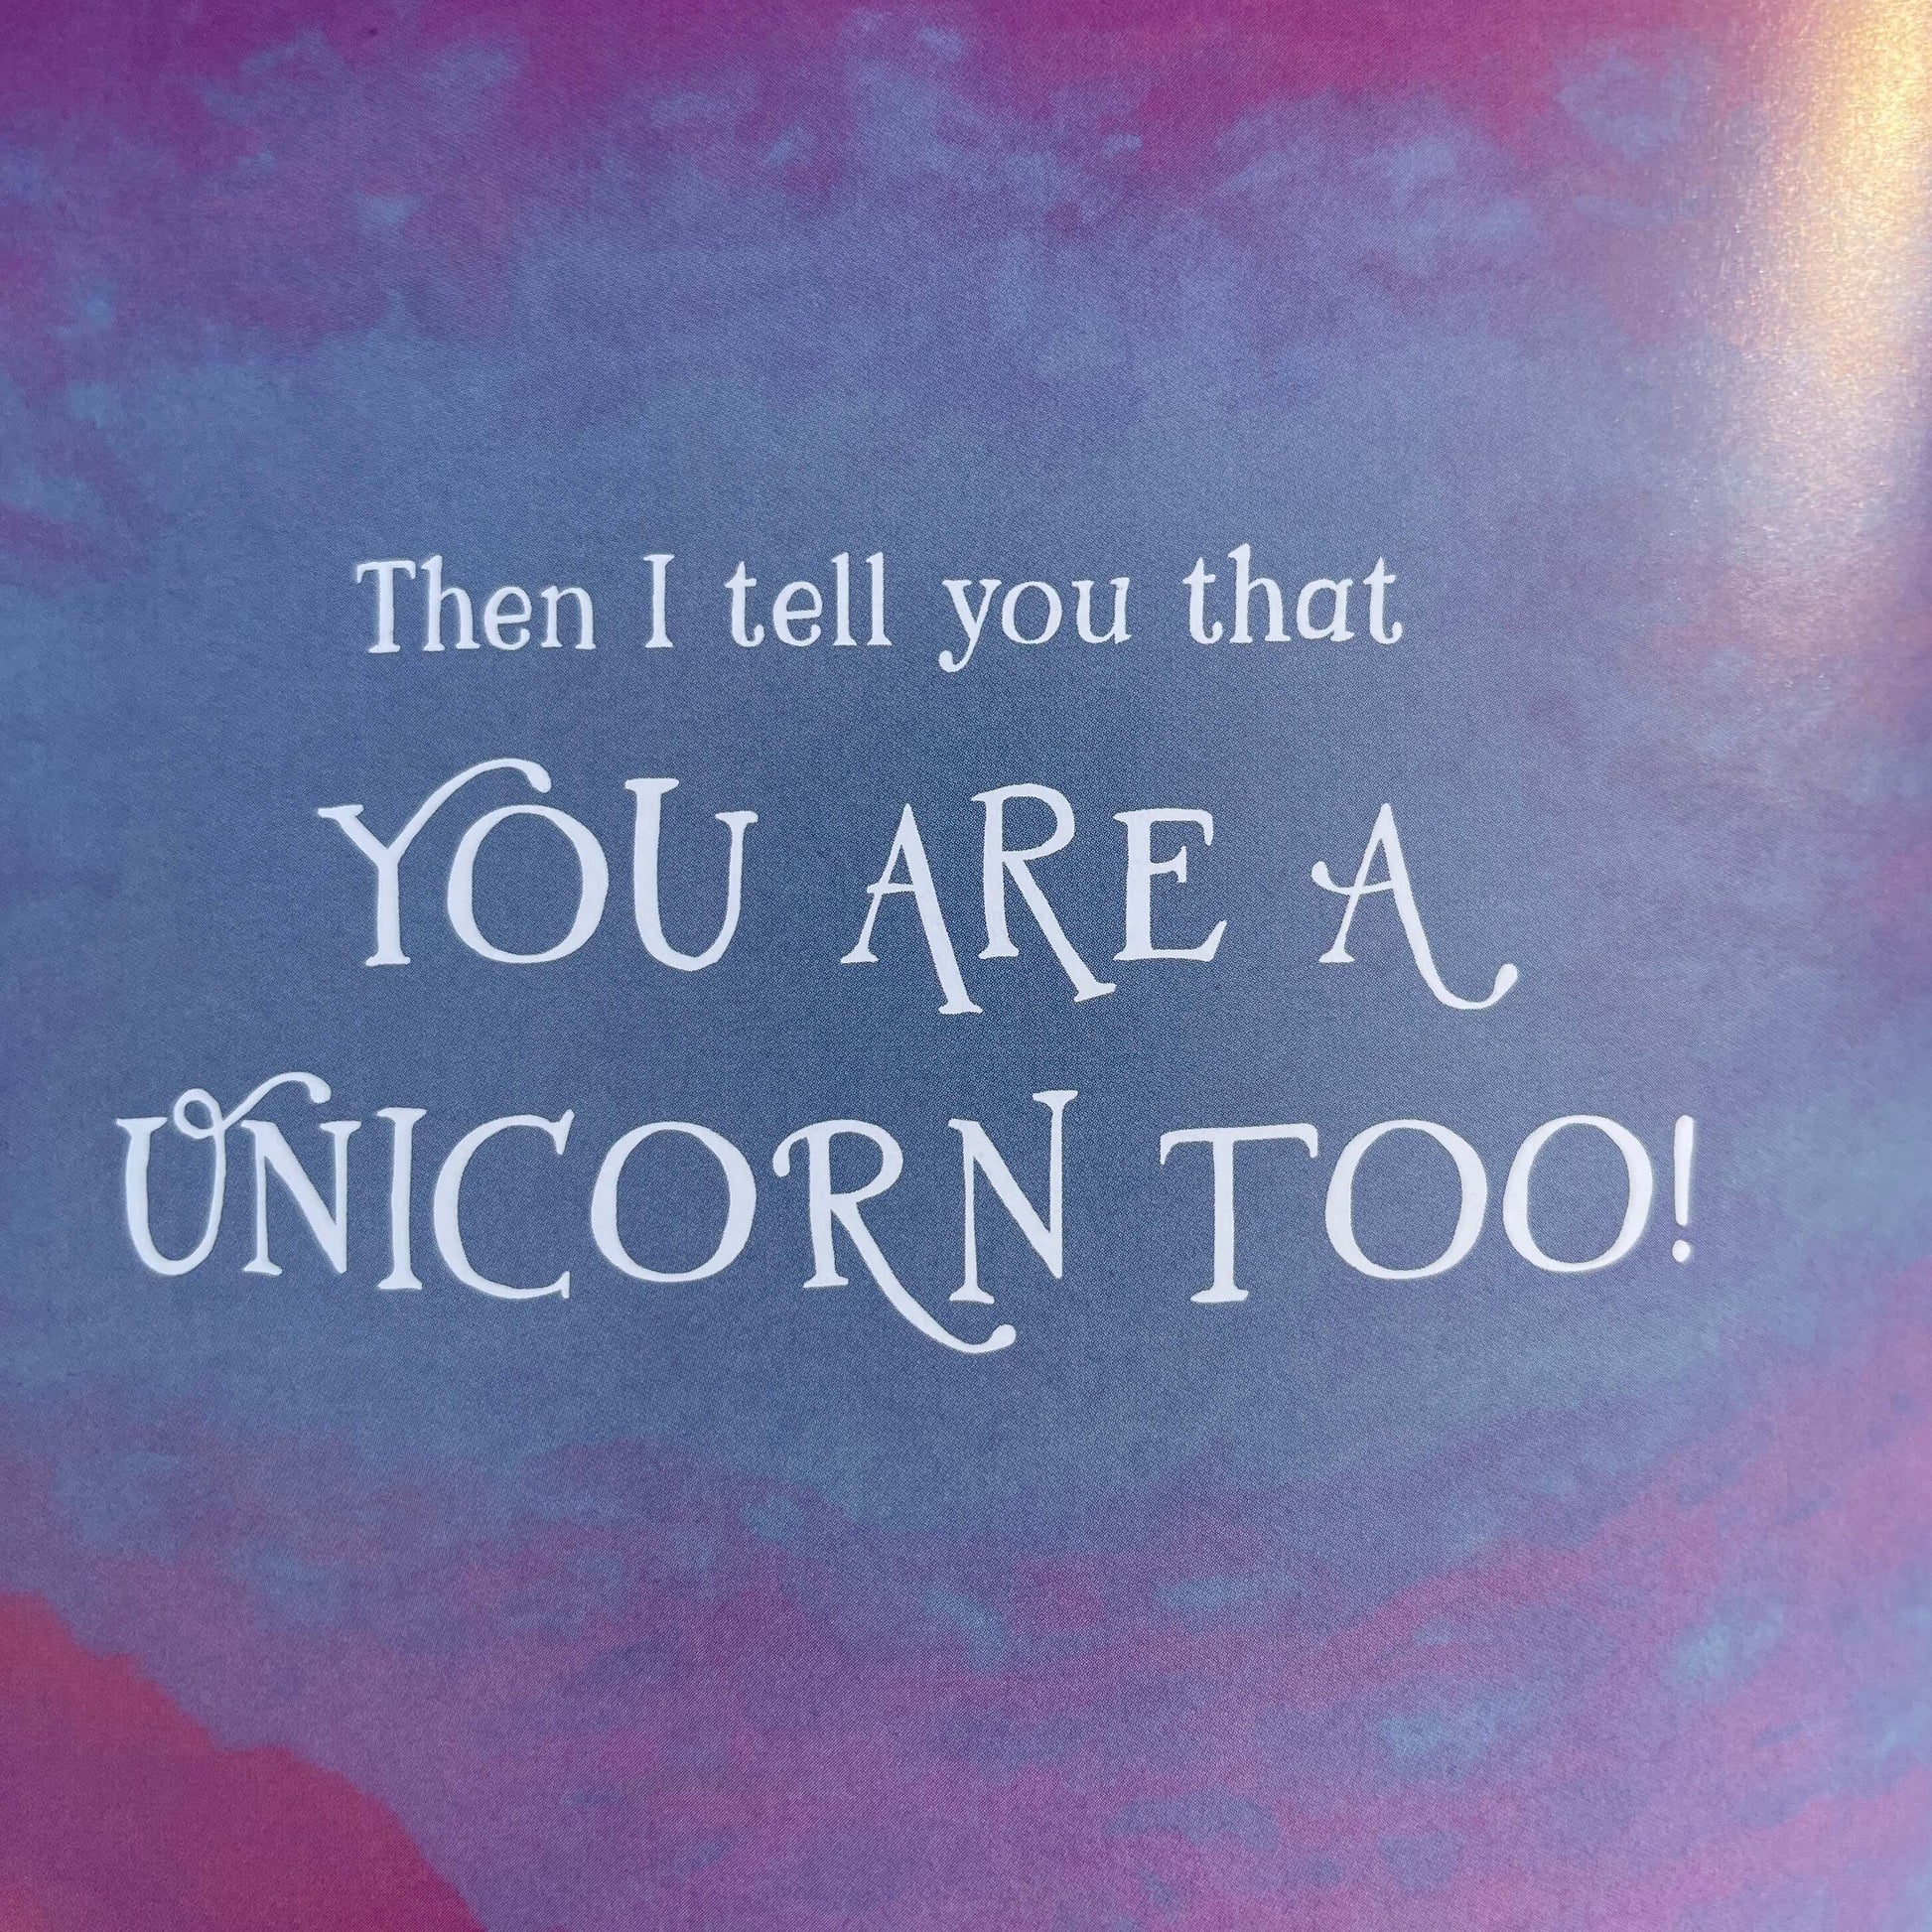 Page from childrens book Sing Like A Unicorn.